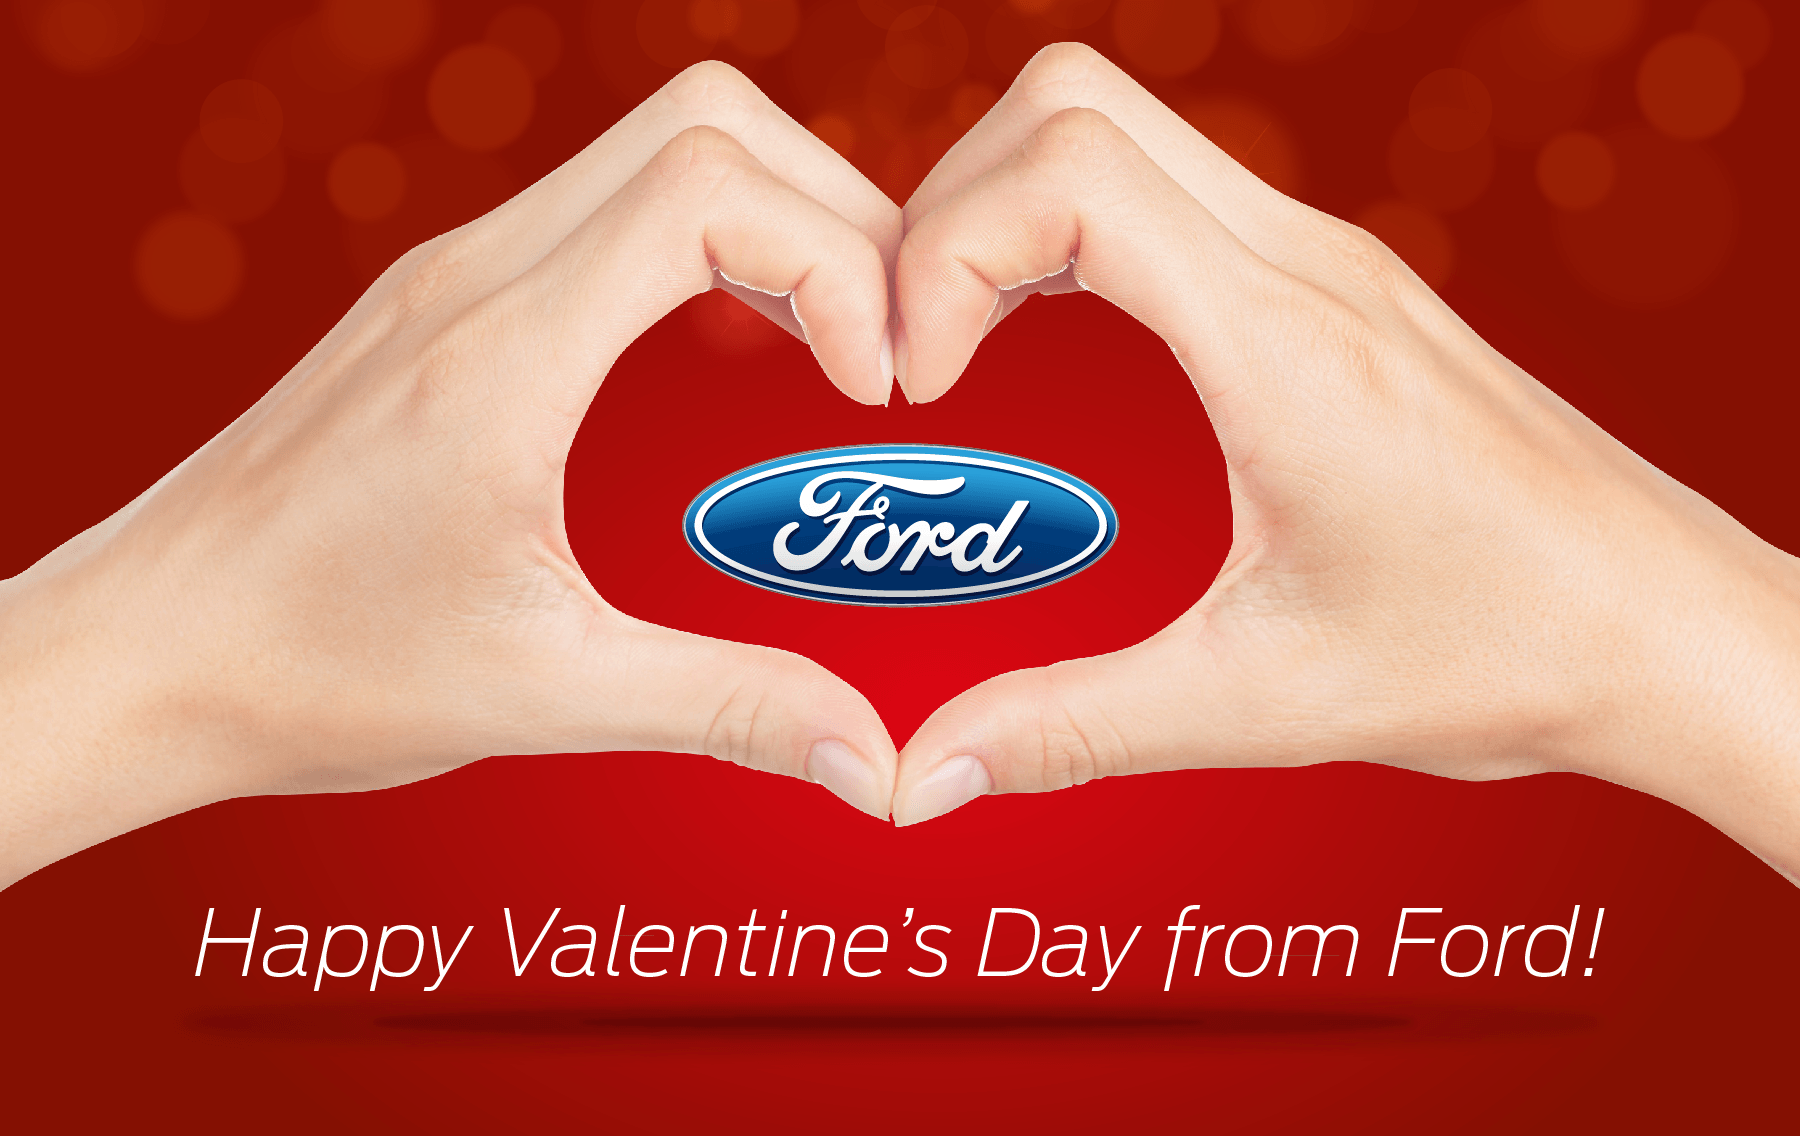 2 Red Hands Logo - Romantic Tips From Ford This Valentine's Day